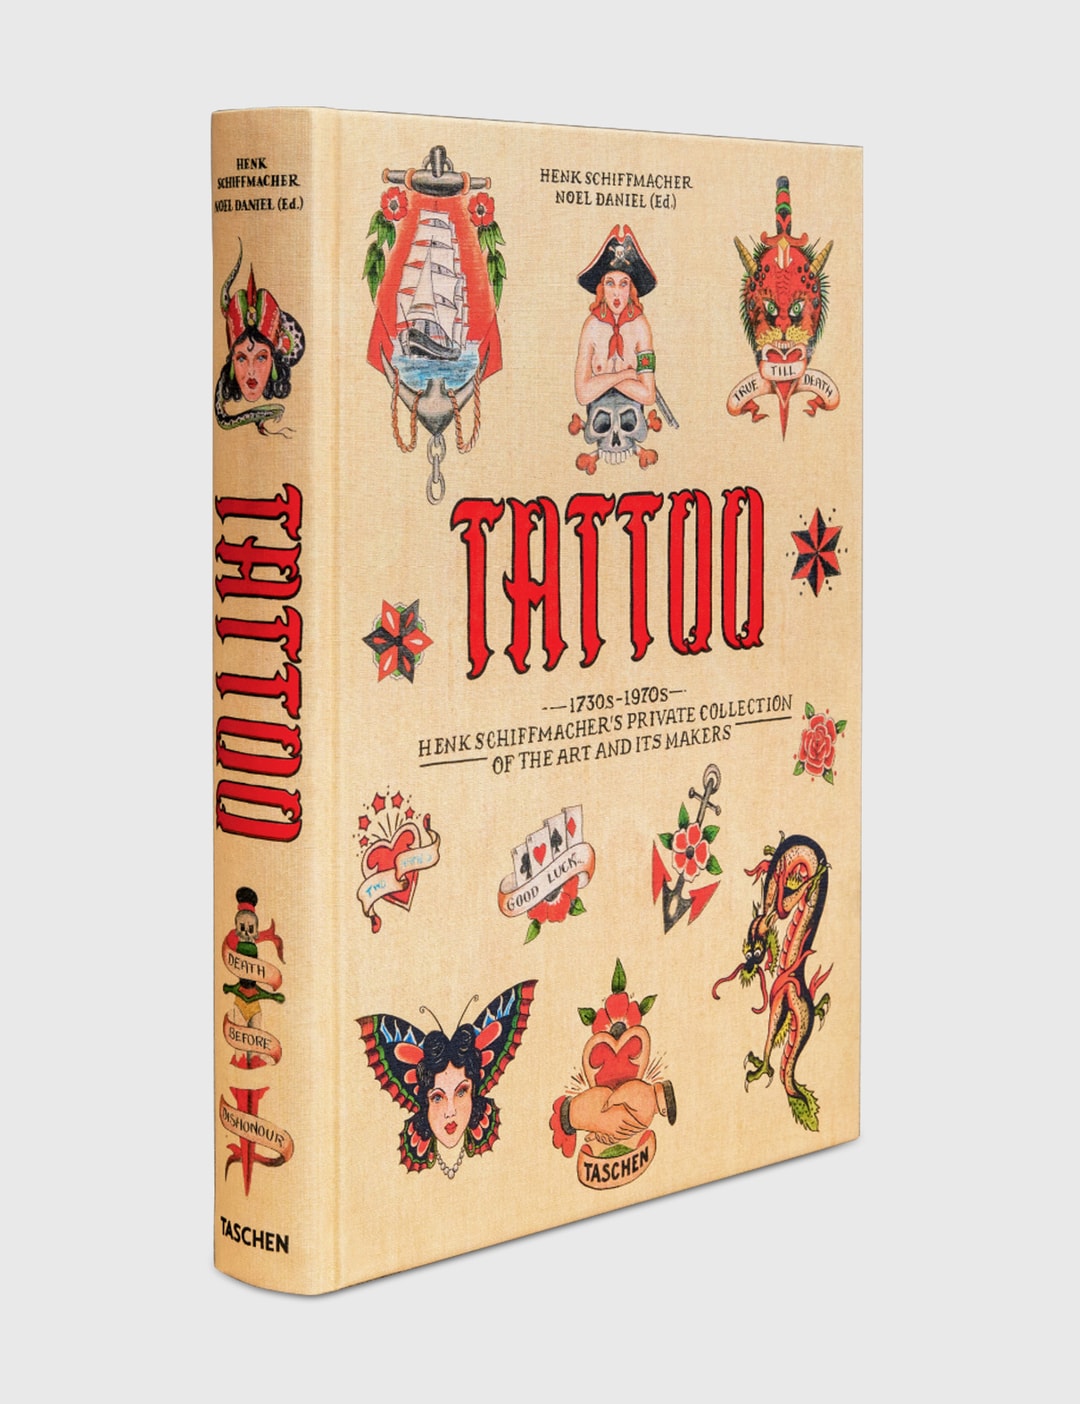 TATTOO. 1730s-1970s. Henk Schiffmacher's Private Collection Placeholder Image